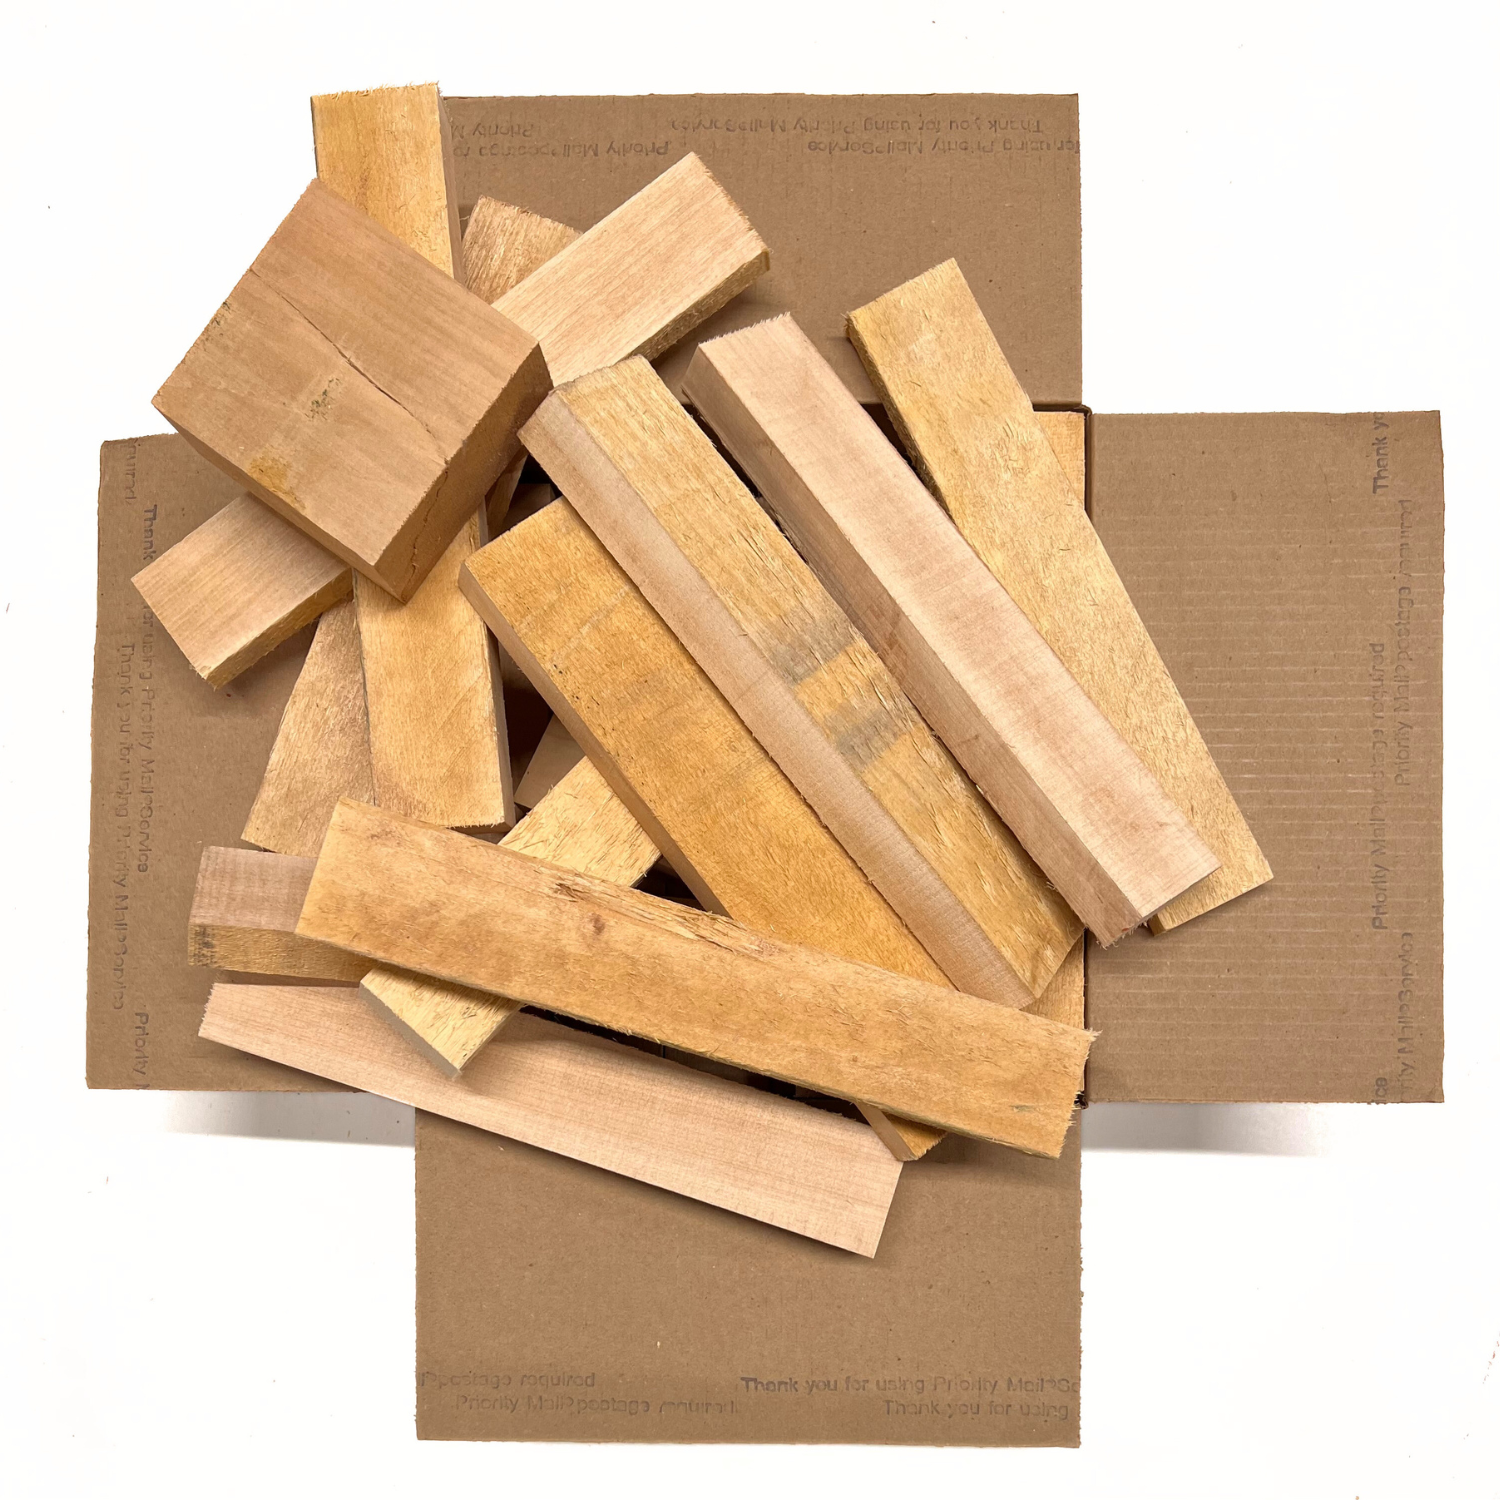 Lime (Basswood) Wood Carving Blanks - Ideal for Carvers